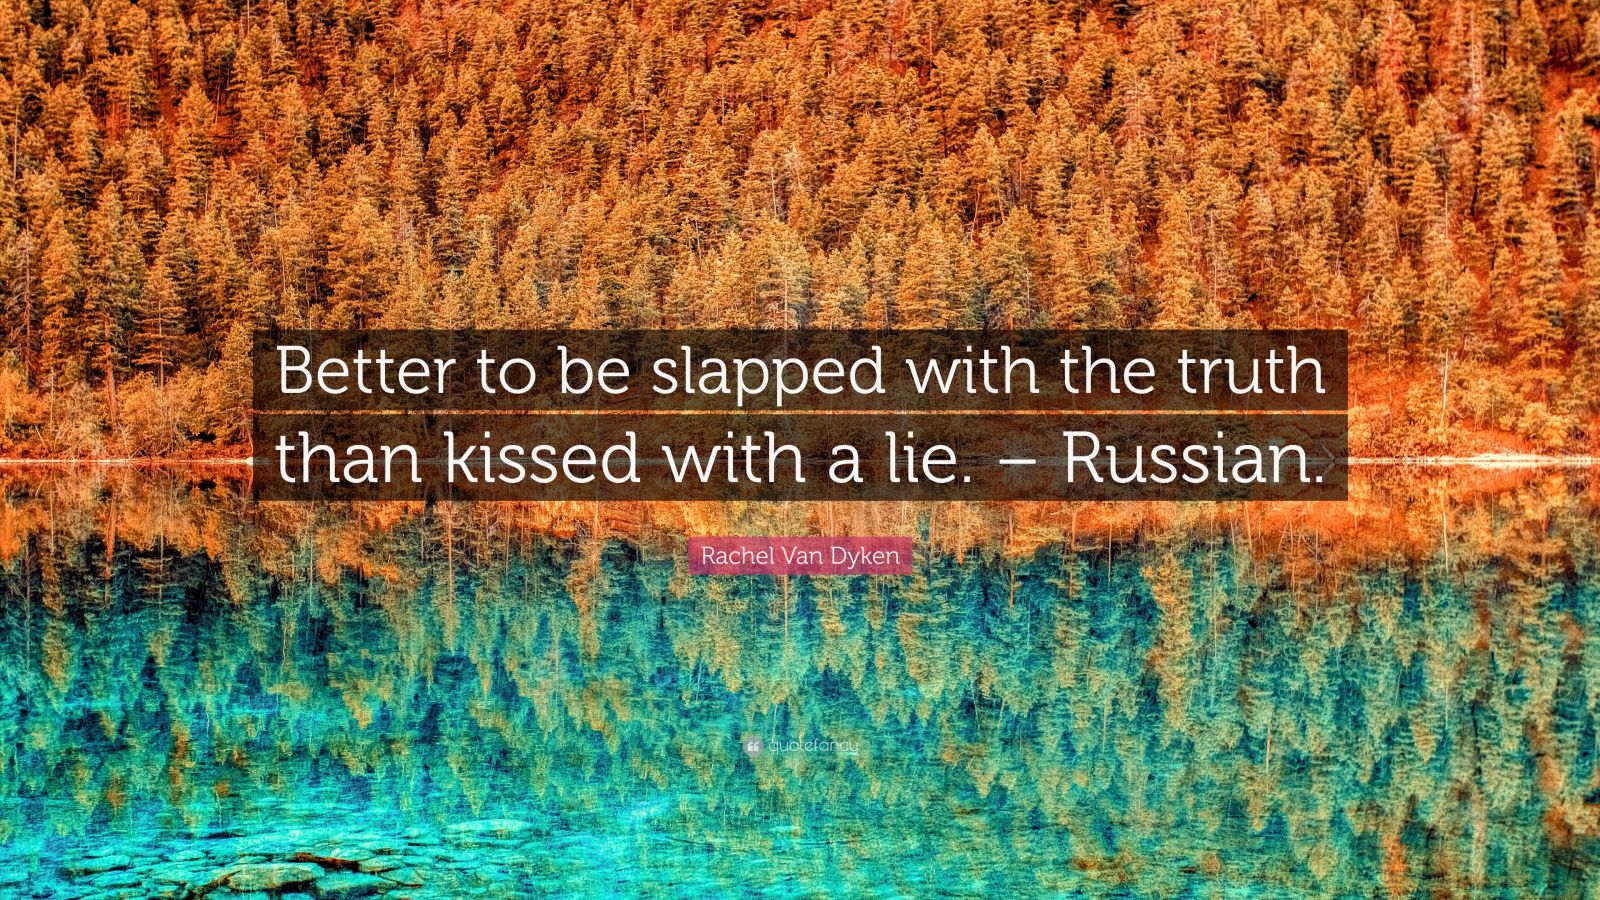 Rachel Van Dyken Quote “better To Be Slapped With The Truth Than Kissed With A Lie Russian” 9260